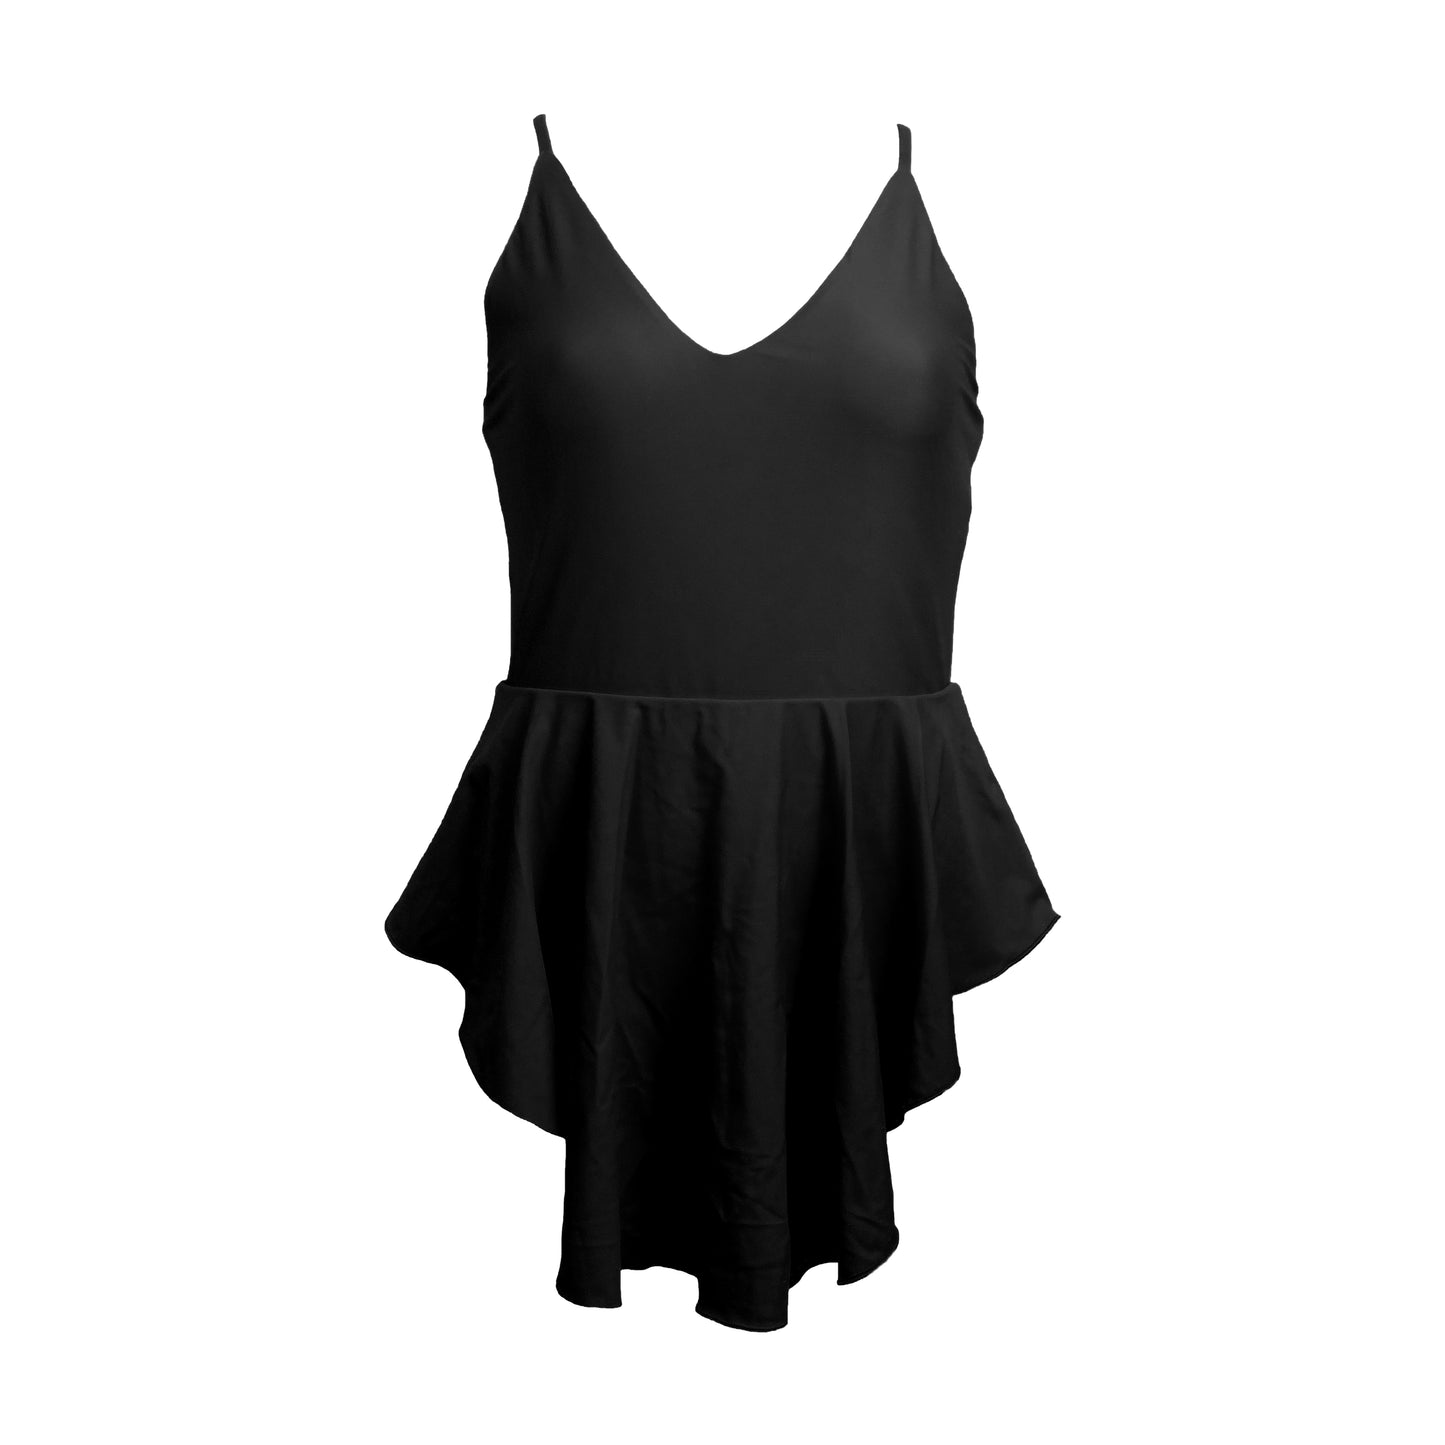 Black simplistic plunging v-neck one piece swimsuit with an added high-low skater skirt overlay. Under the skirt layer the bodys bottom half has a low  back, high cut legs and full coverage.